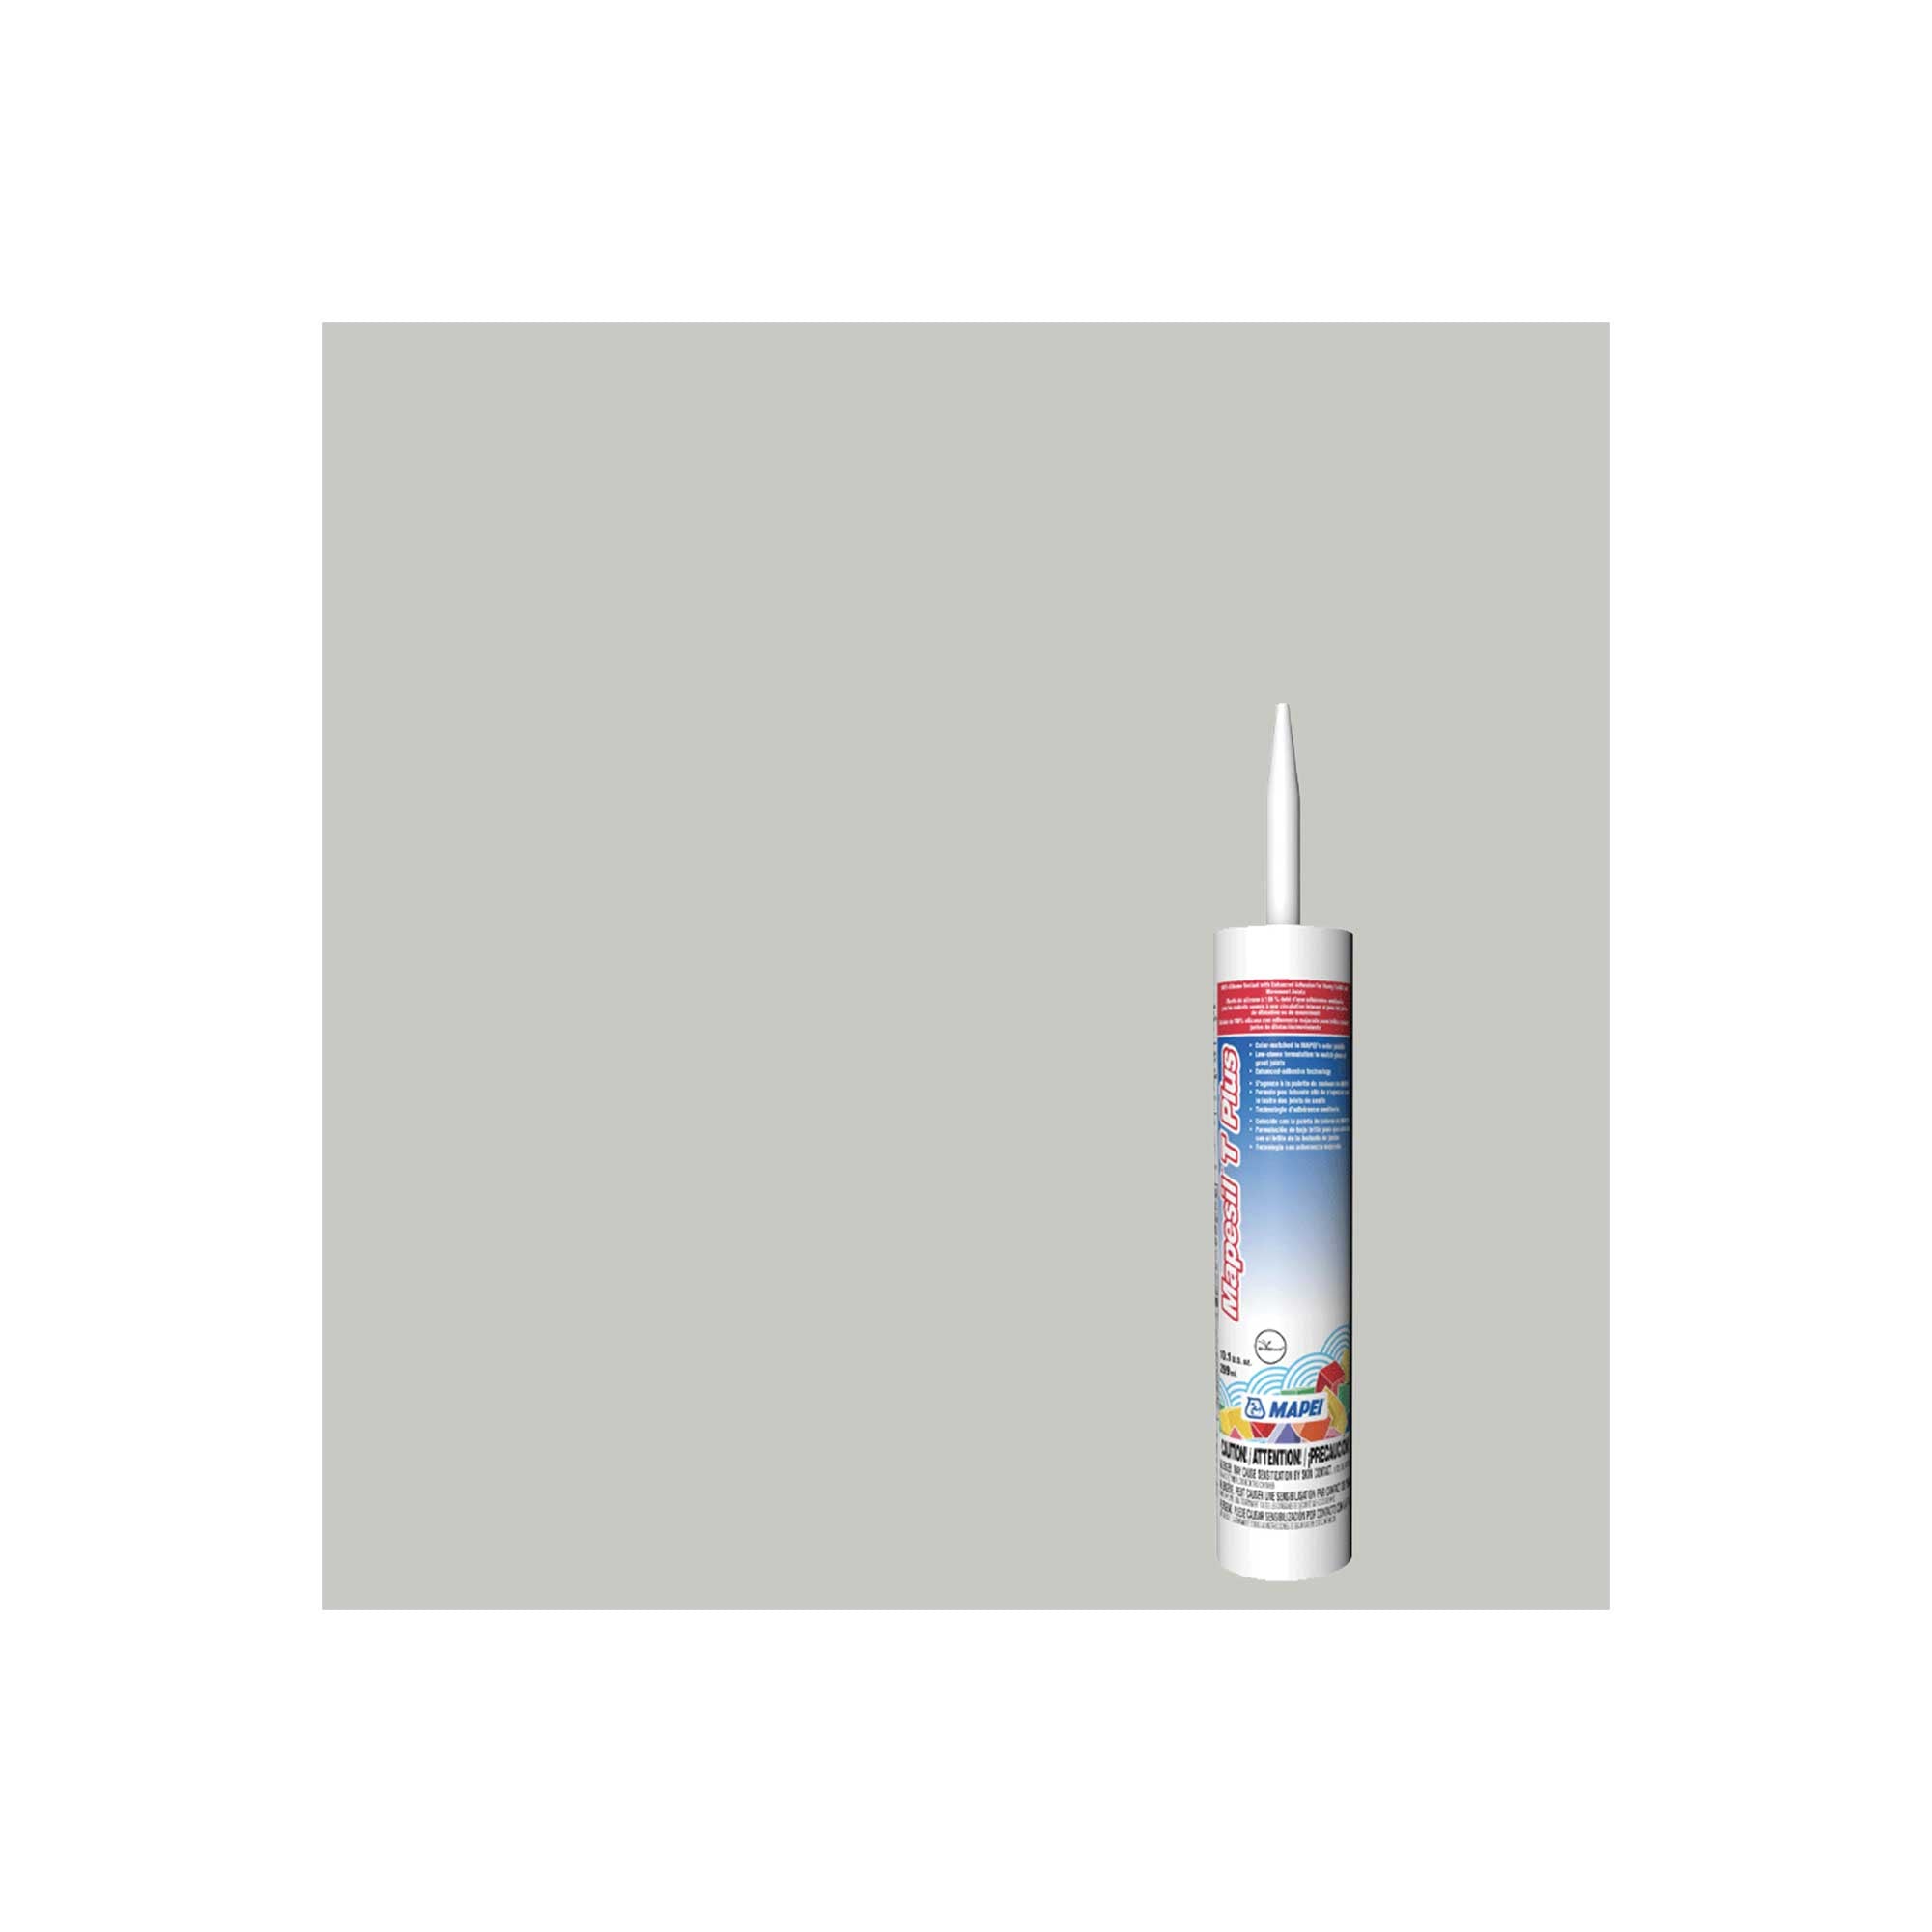 Mapei 202 Frosted Glass Mapesil 3D Silicone Caulk